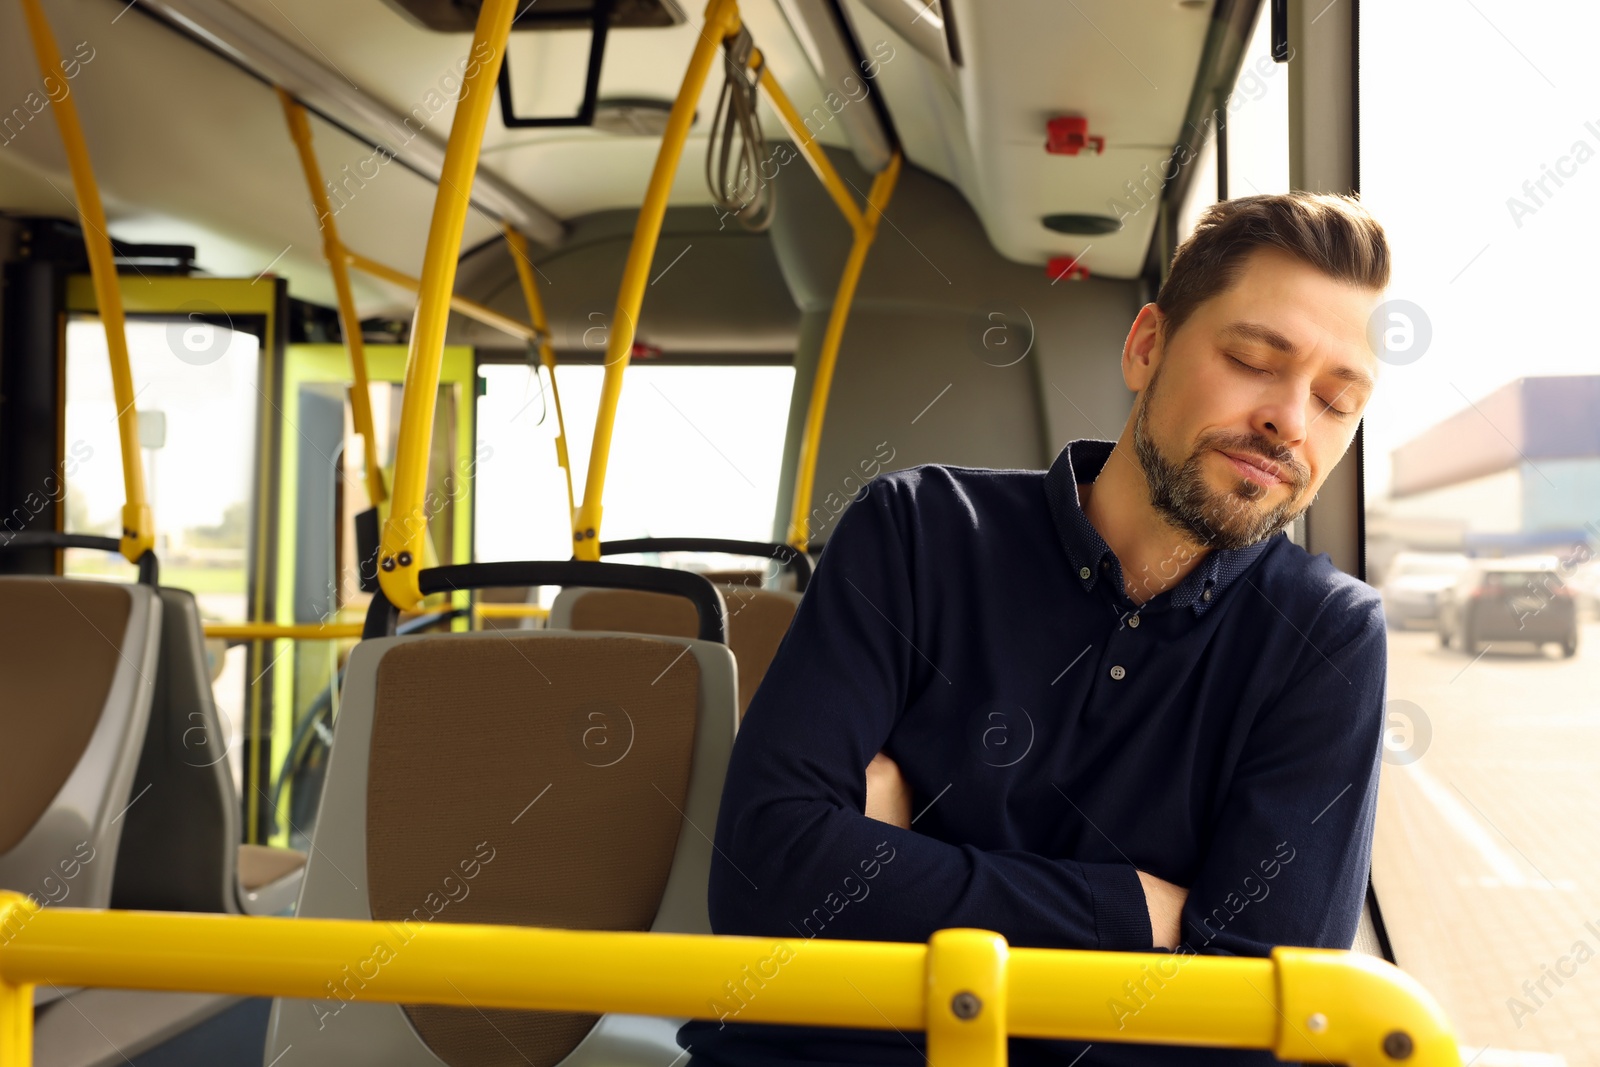 Photo of Tired man sleeping while sitting in public transport